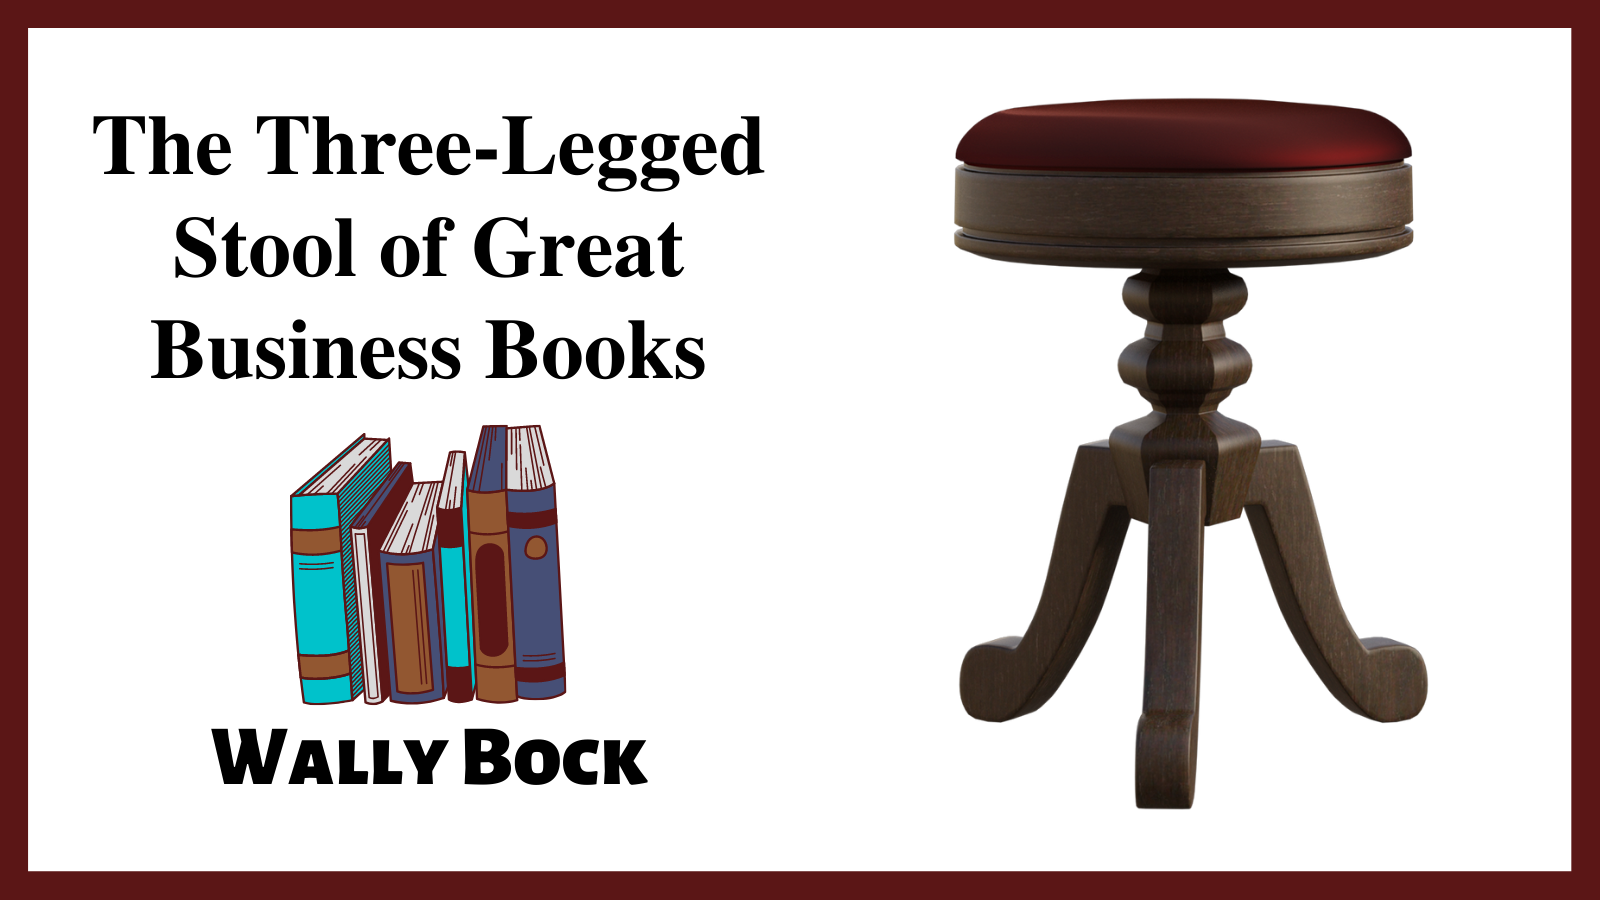 The Three-Legged Stool of Great Business Books